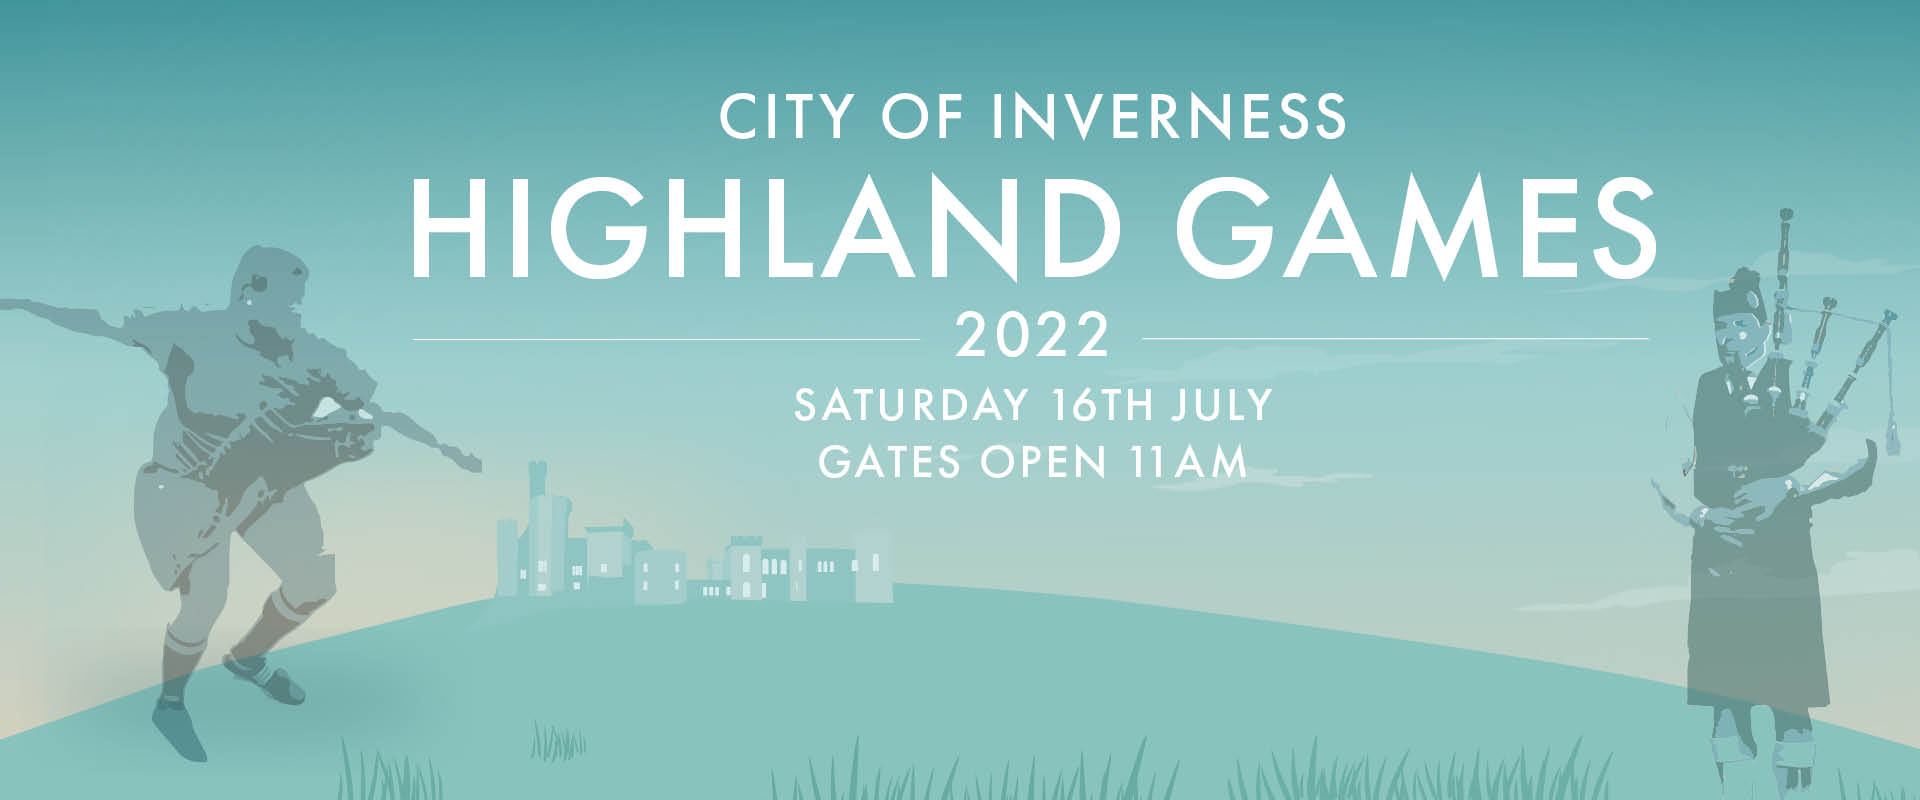 Inverness Highland Games tickets now on sale High Life Highland